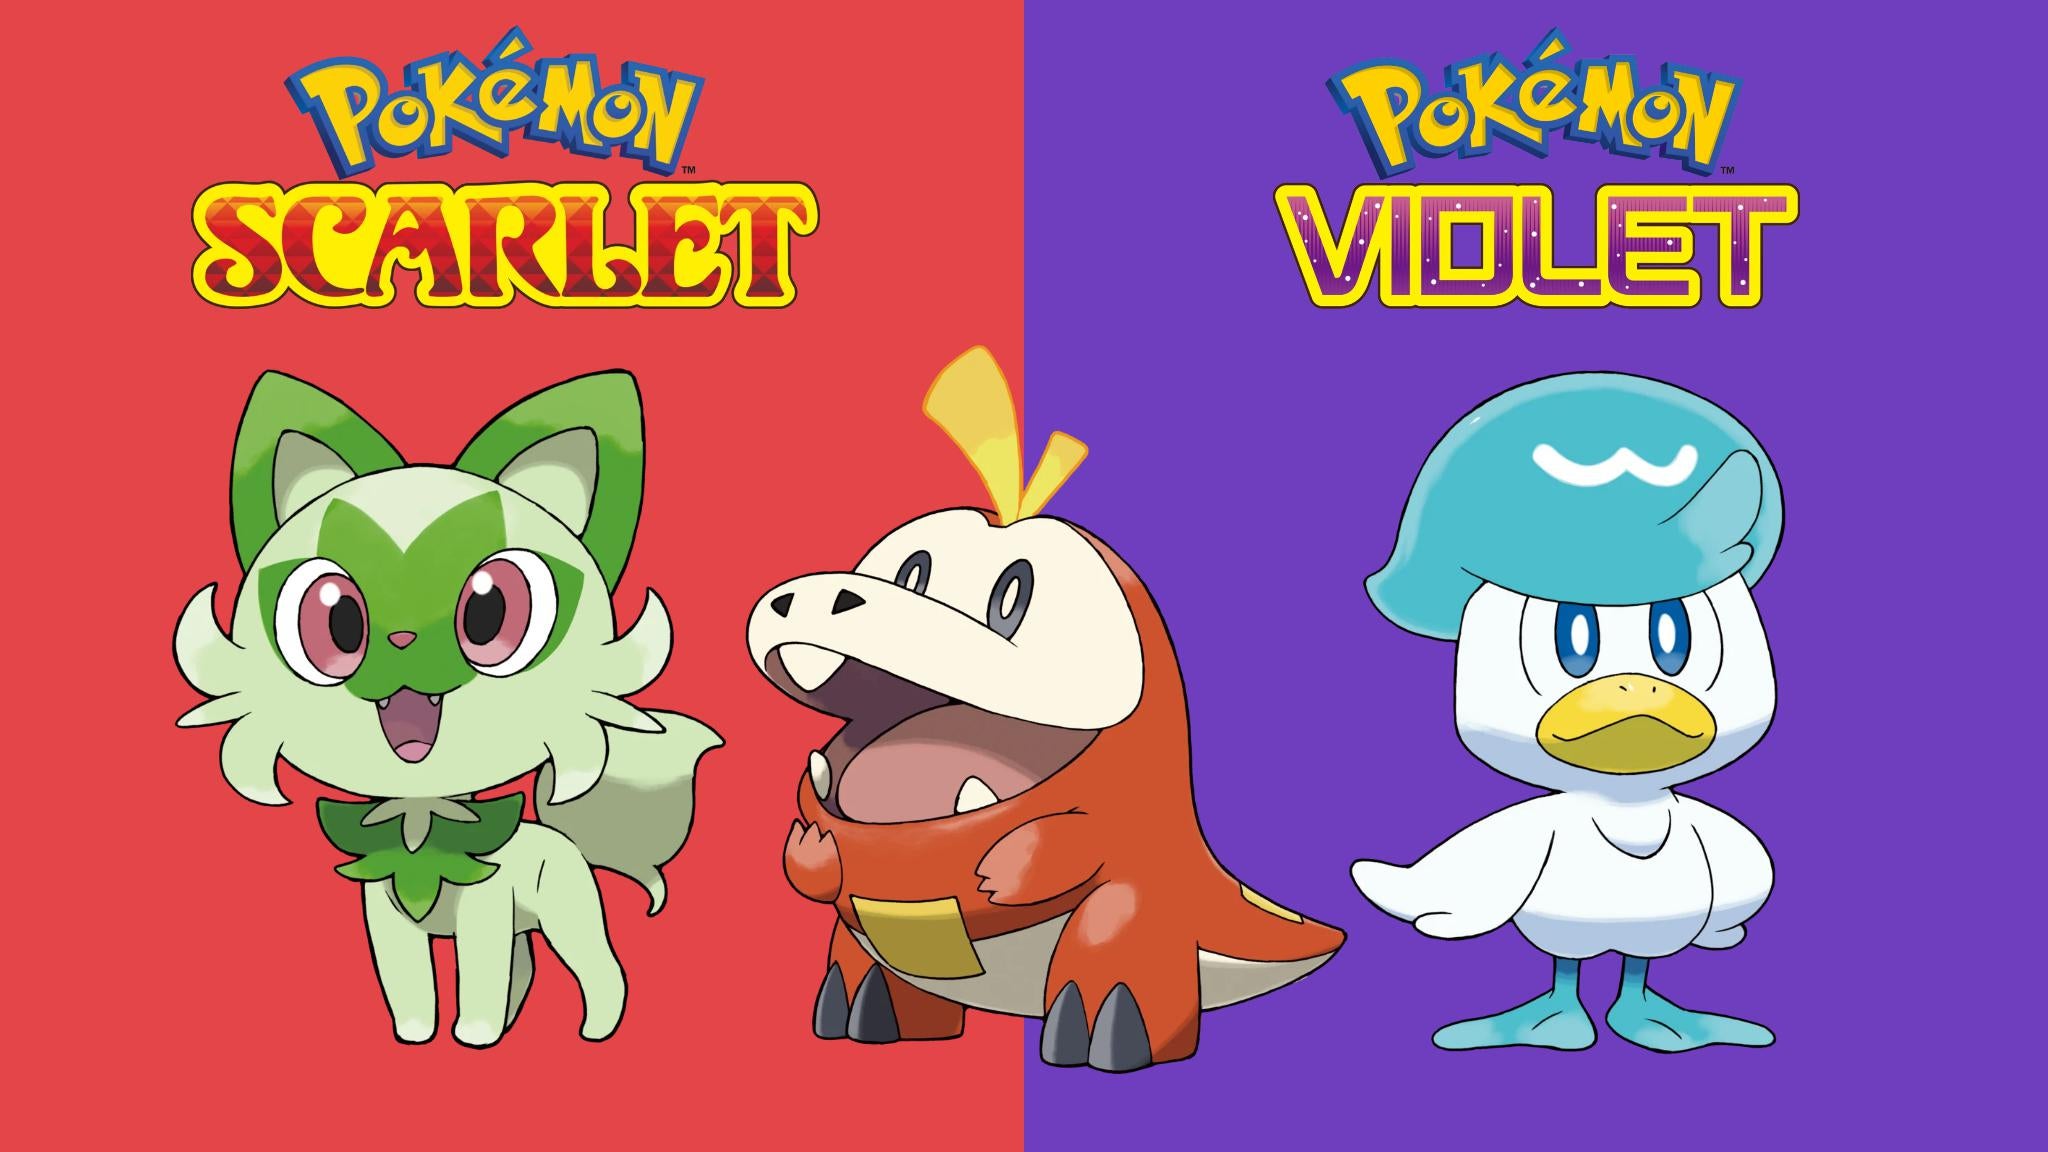 Pokemon Scarlet And Violet Wallpapers - Wallpaper Cave